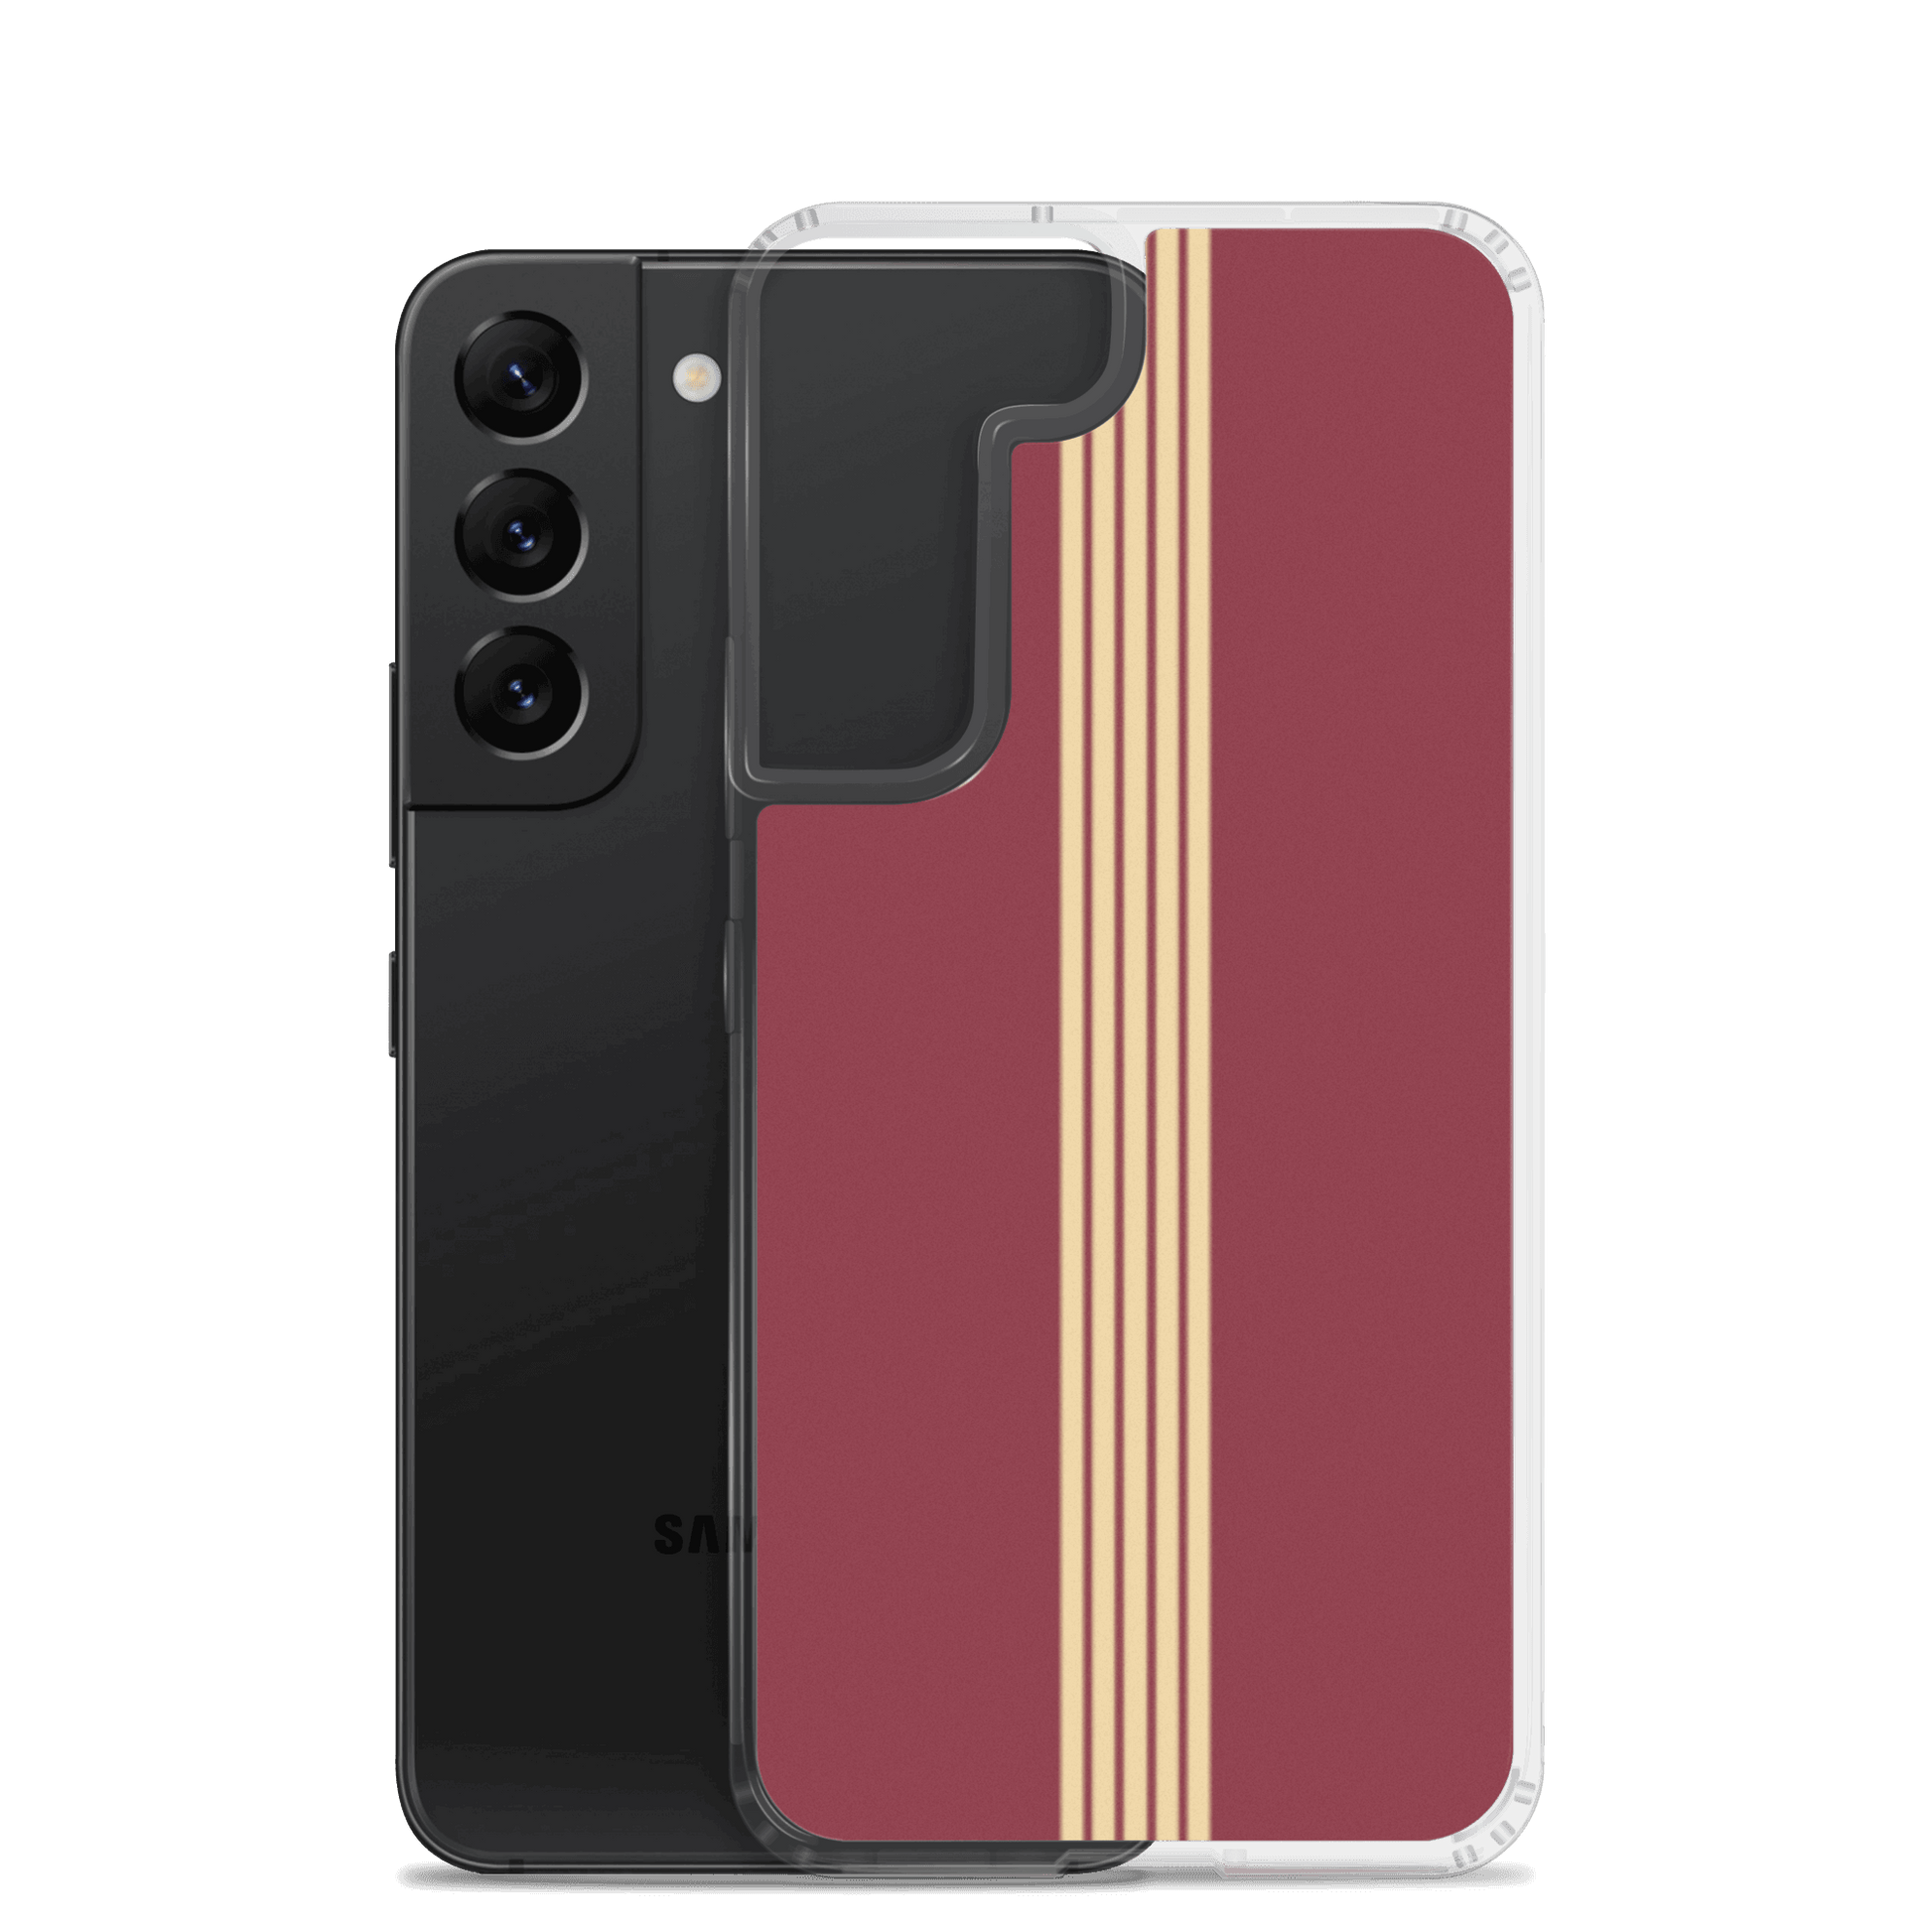 Classic Red in Gold Stripes - Samsung Scratch-Resistant Clear Phone Case DrawDadDraw